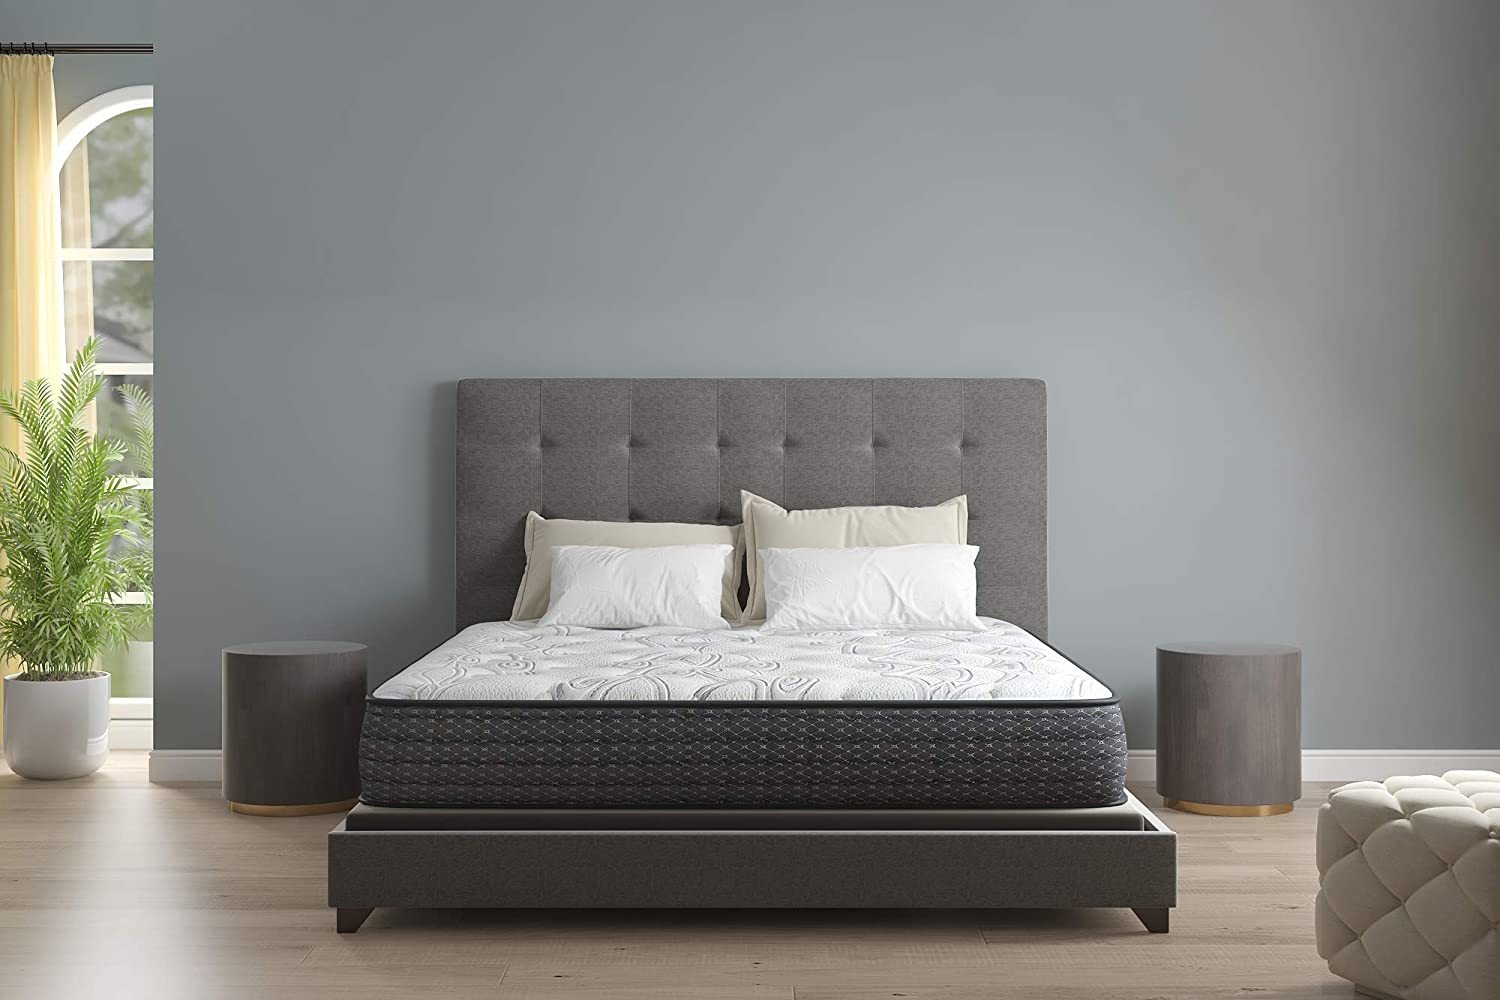 Primary image for Signature Design By Ashley Limited Edition 11 Inch Plush Hybrid Mattress,, King